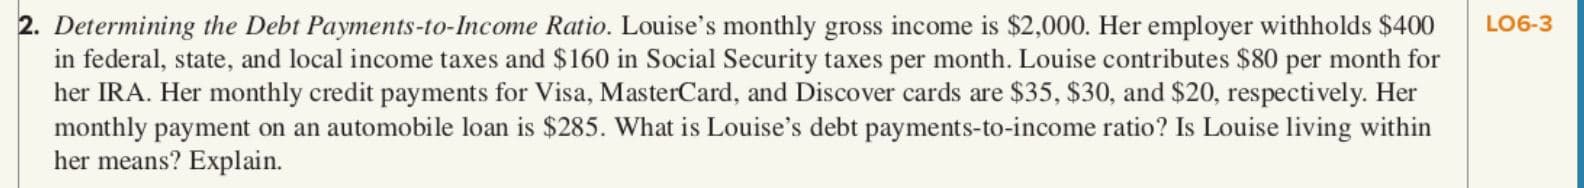 2. Determining the Debt Payments-to-Income Ratio. Louise's monthly gross income is $2,000. Her employer withholds $400
in federal, state, and local income taxes and $160 in Social Security taxes per month. Louise contributes $80 per month for
her IRA. Her monthly credit payments for Visa, MasterCard, and Discover cards are $35, $30, and $20, respectively. Her
monthly payment on an automobile loan is $285. What is Louise's debt payments-to-income ratio? Is Louise living within
her means? Explain.
LO6-3
